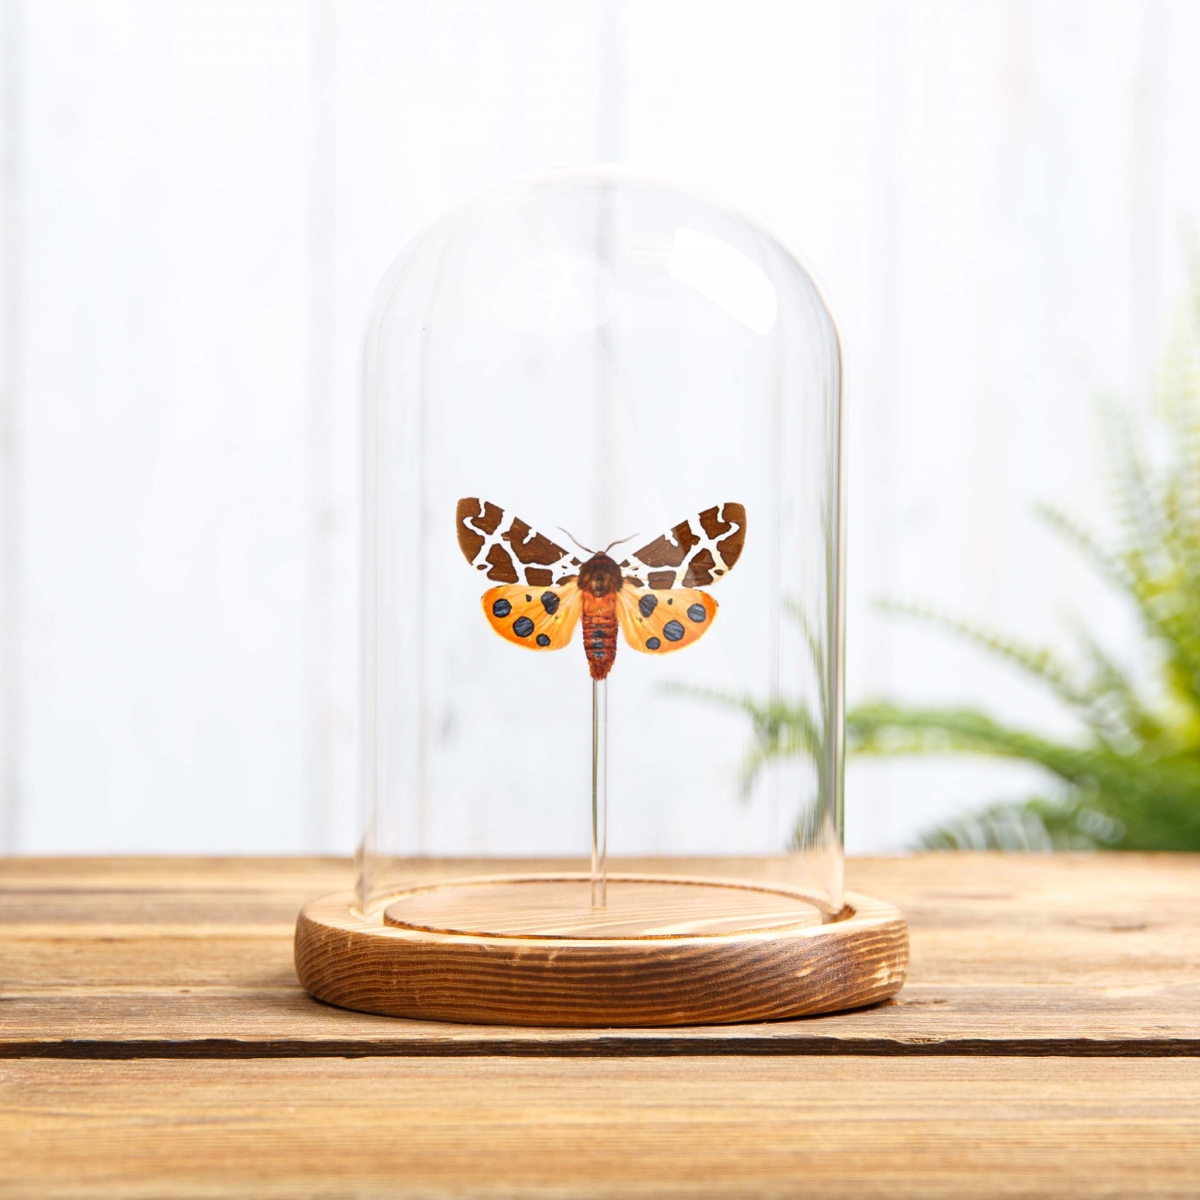 The Garden Tiger Moth in Glass Dome with Wooden Base (Arctia caja)